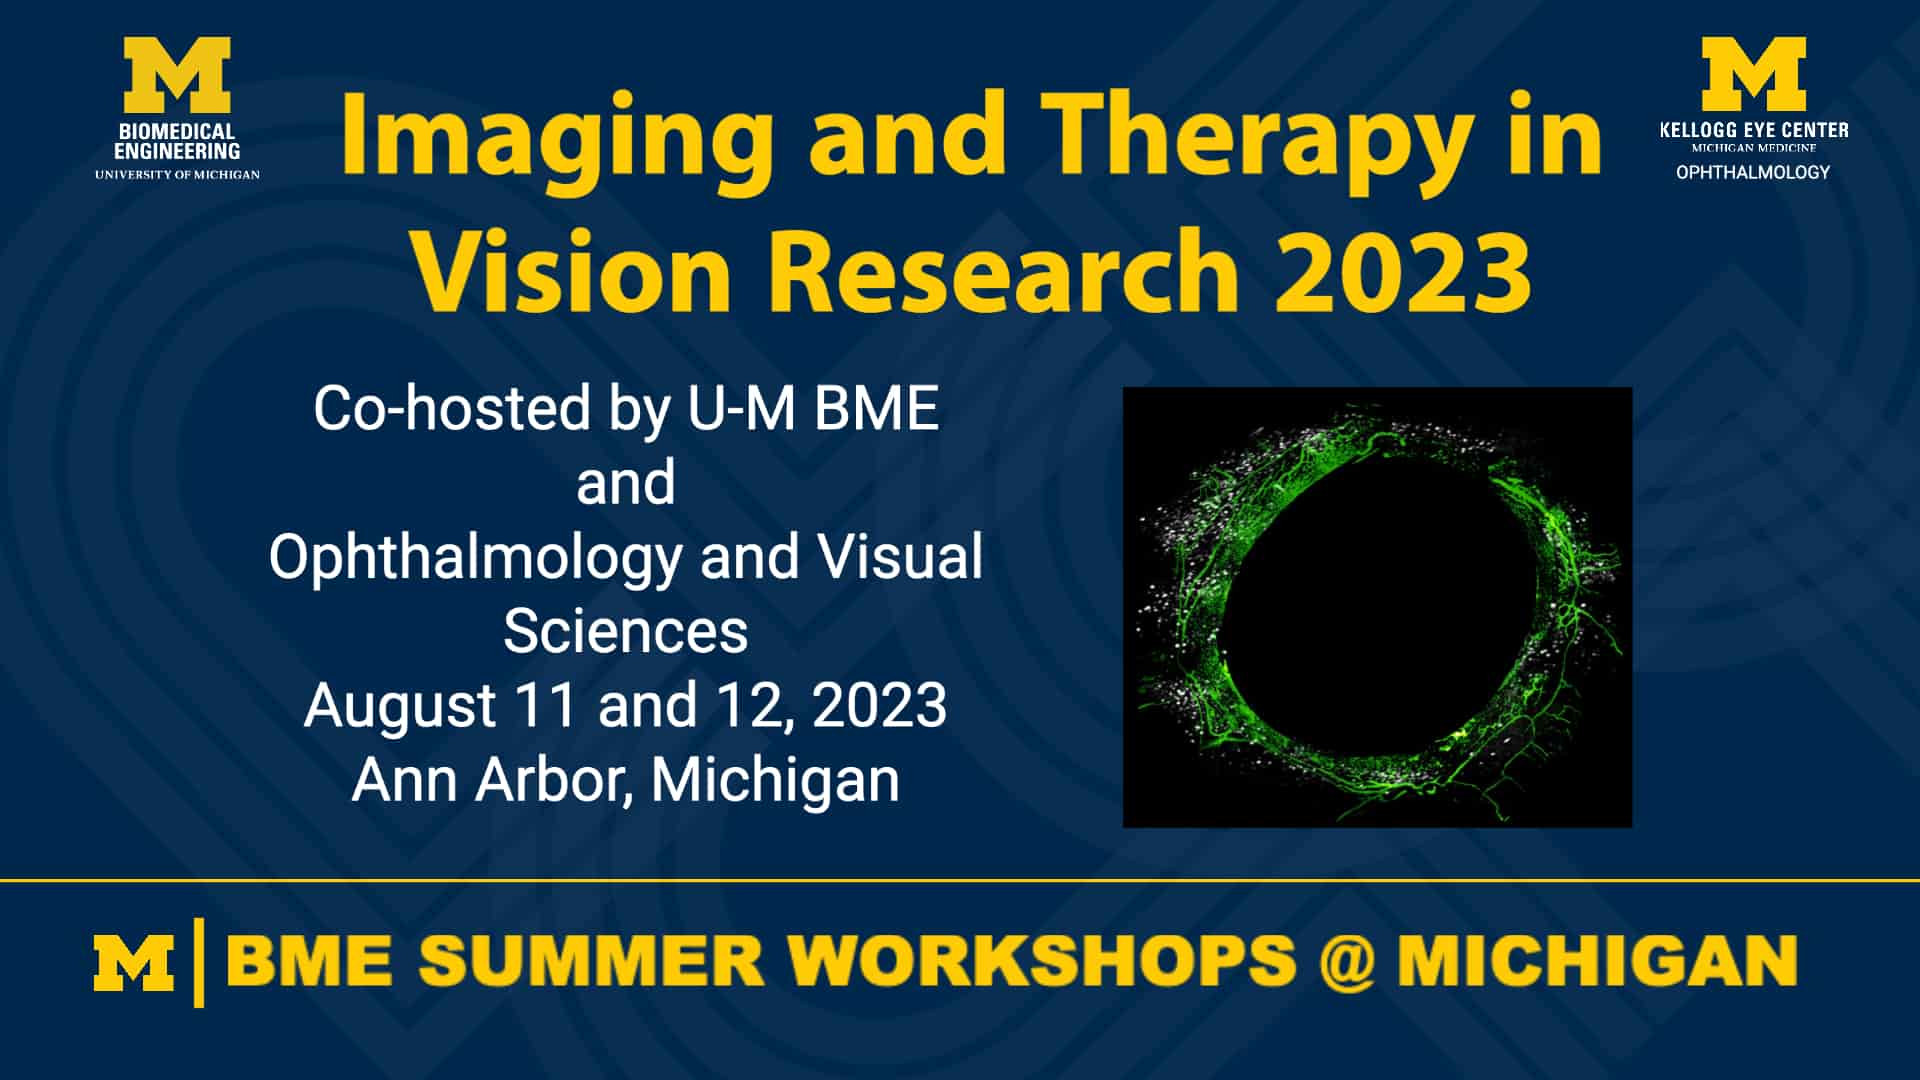 ImagingTherapyVisionResearch2023-featured August 11 and 12, 2023